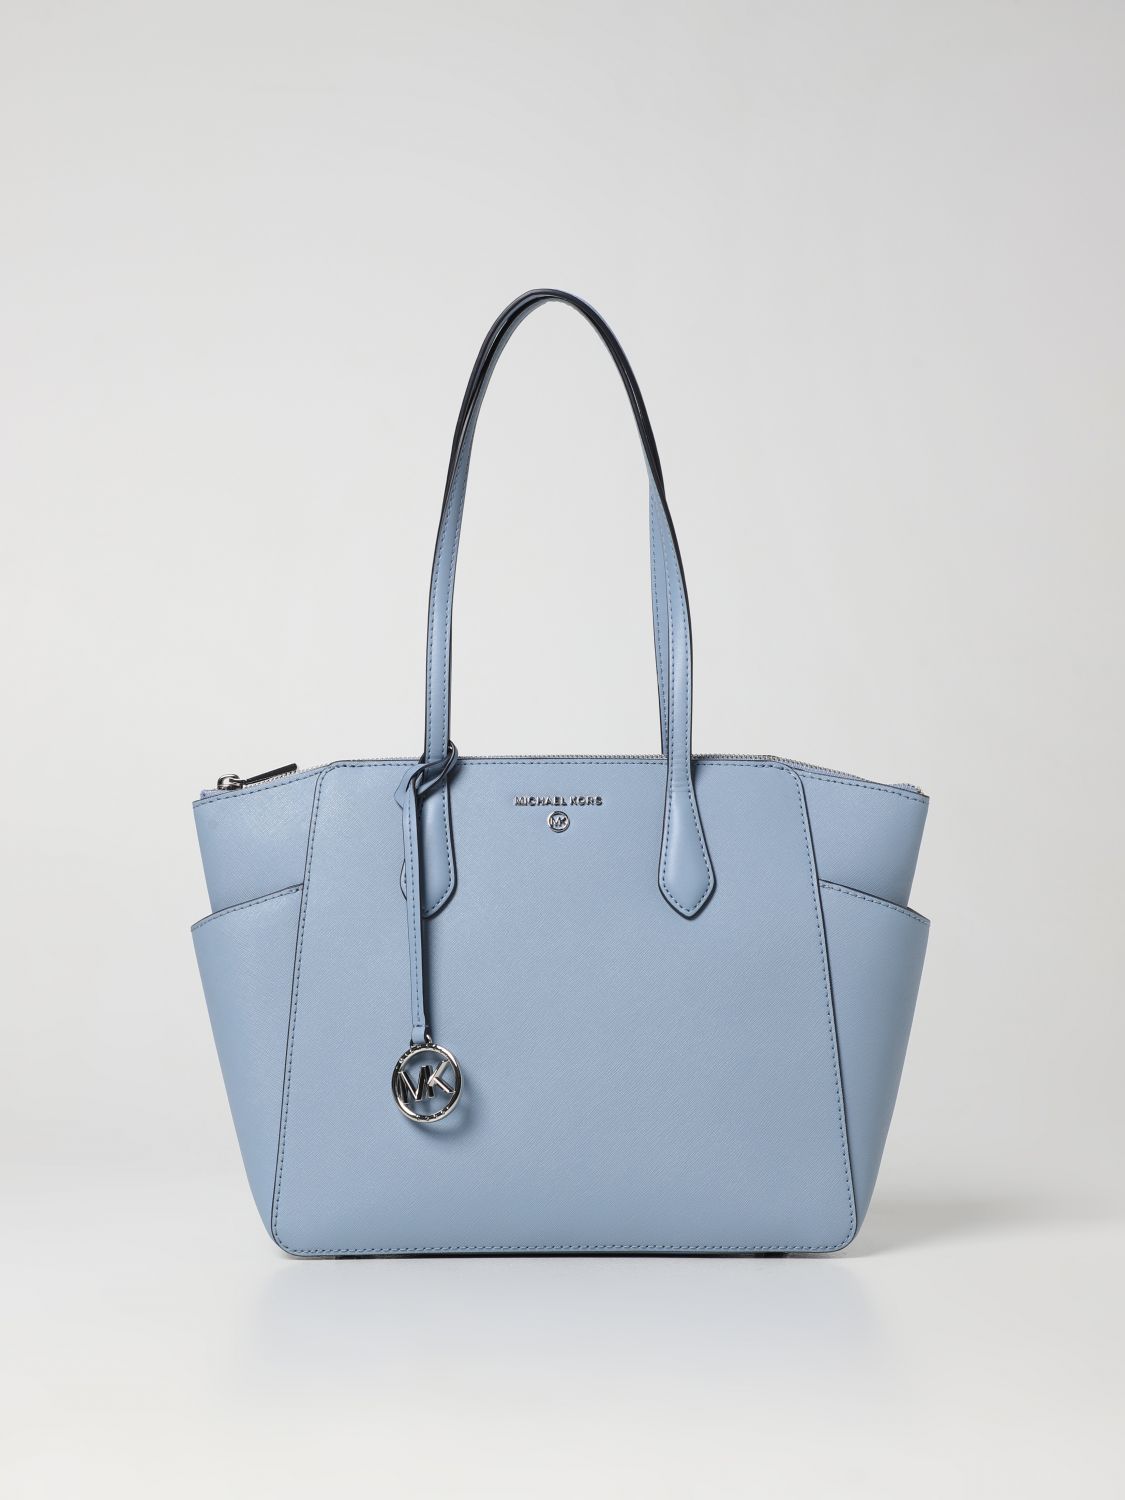 MICHAEL KORS: Mailyn Michael leather bag - Gnawed Blue | Michael Kors tote  bags 30S2L6AT2L online on 